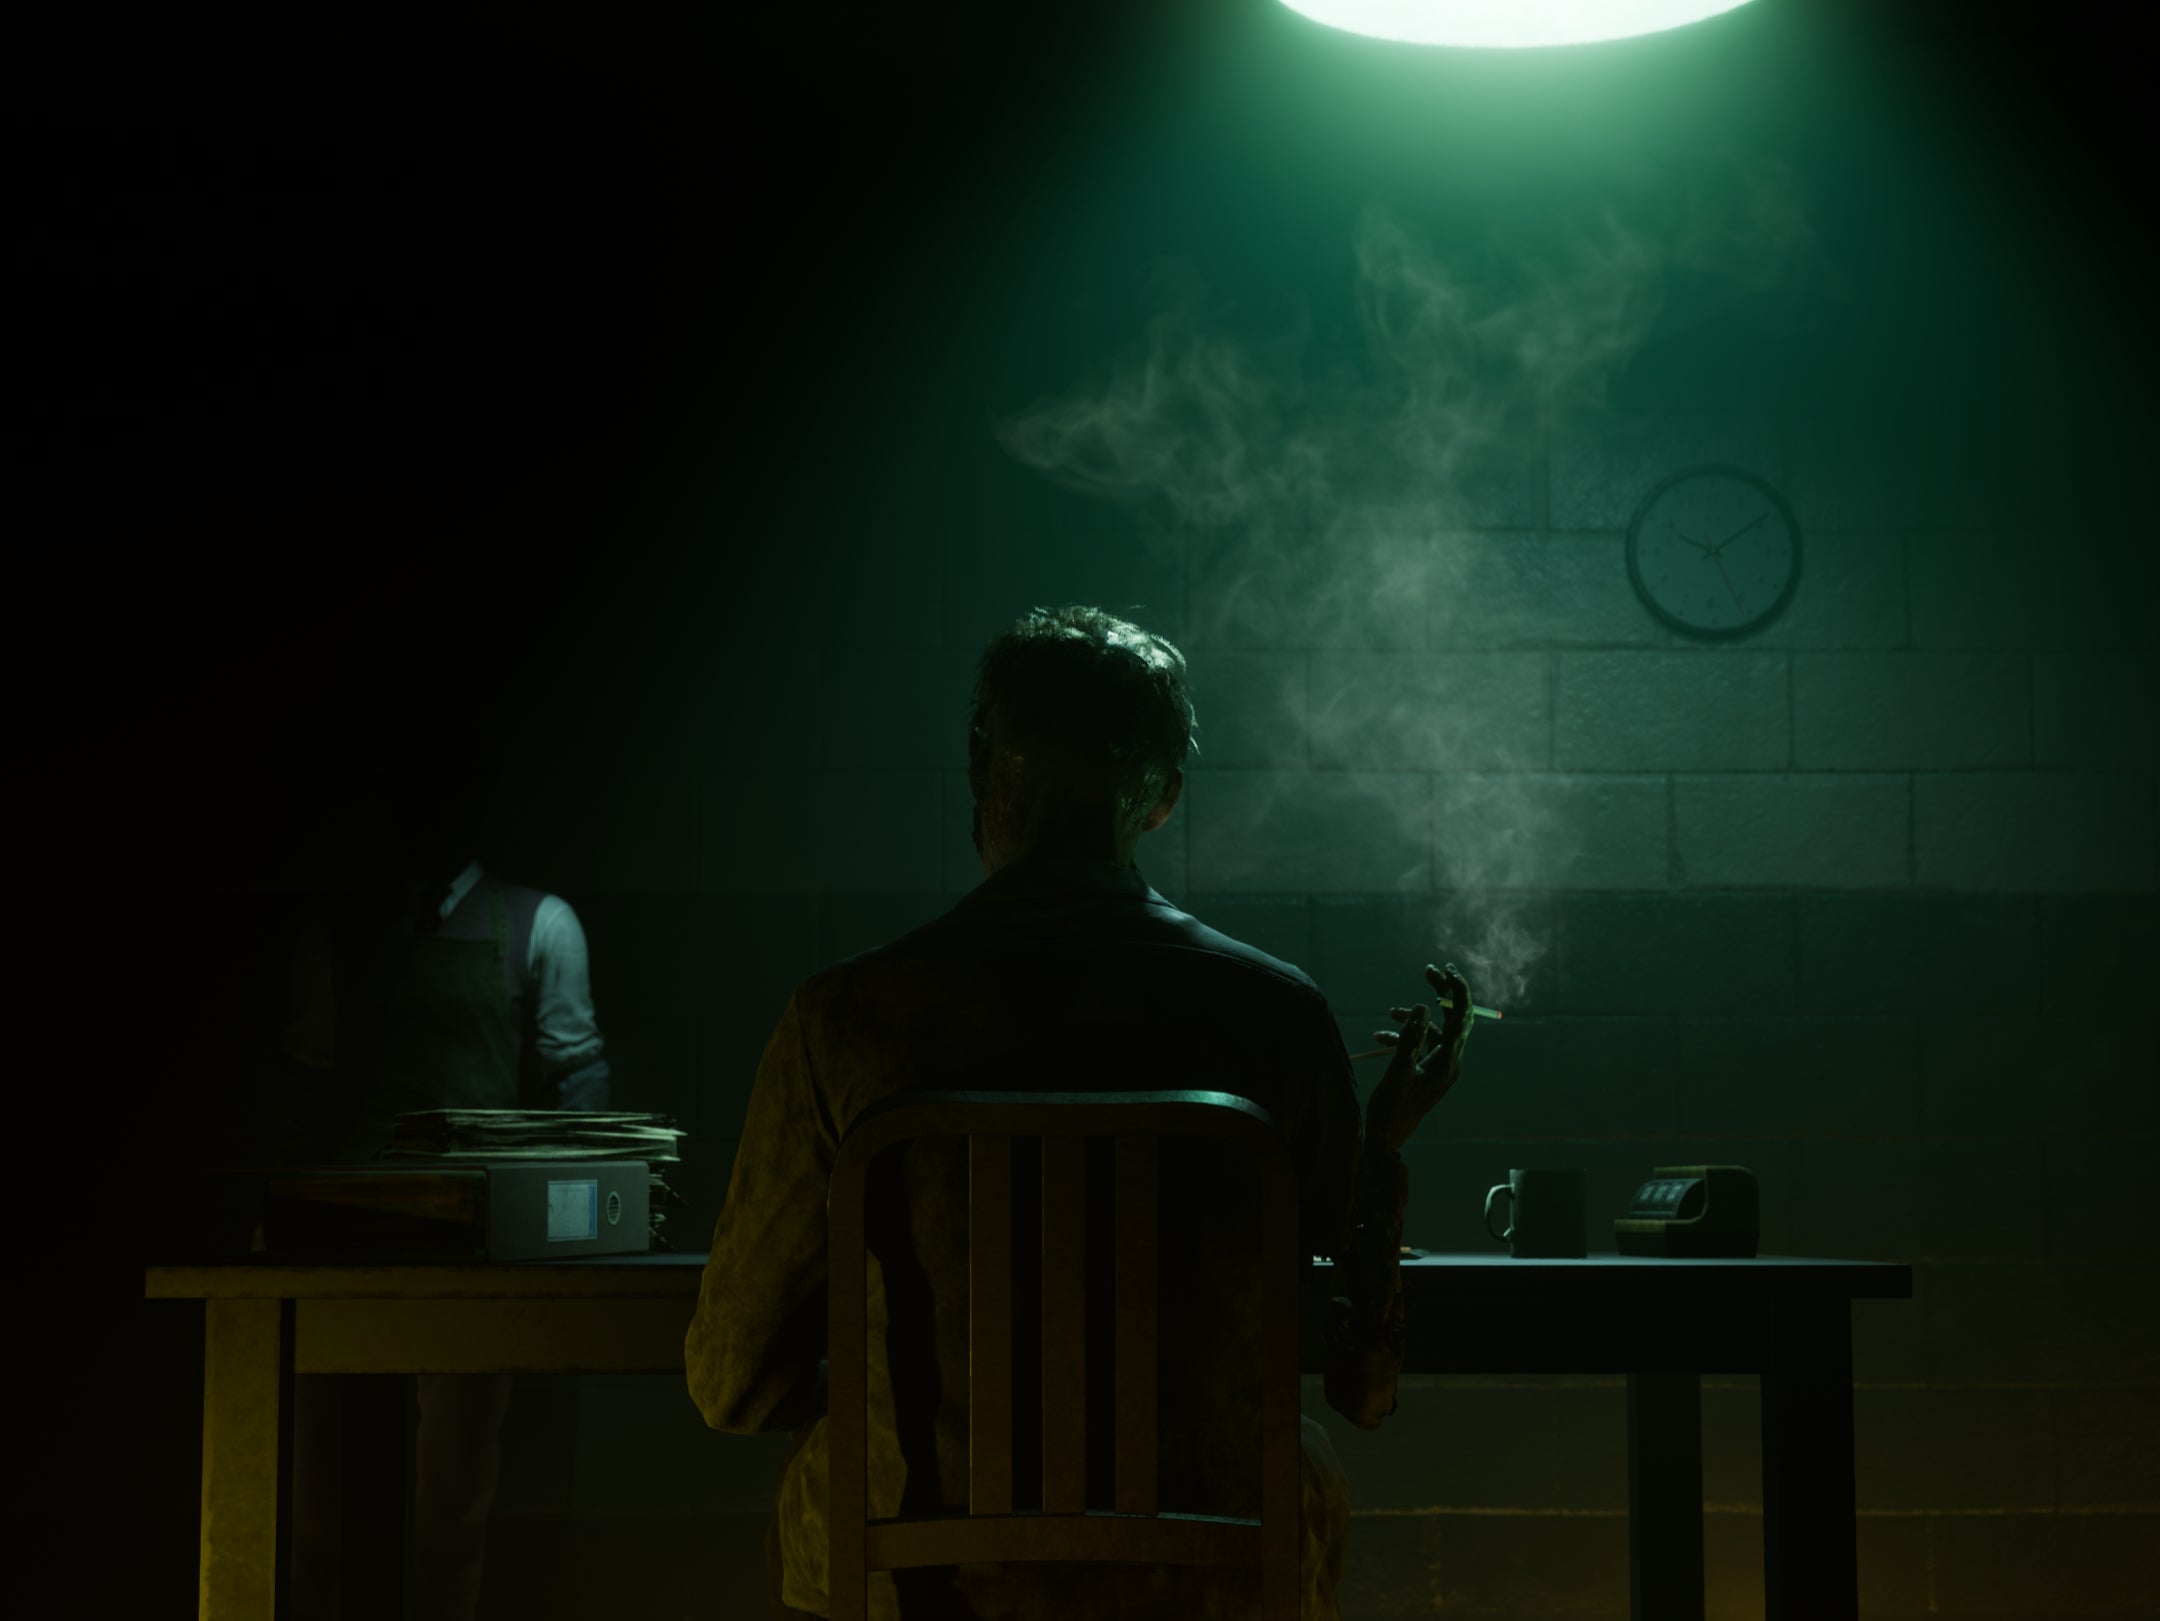 A man sitting at a table with a cigarette in a dark room, facing away from the camera